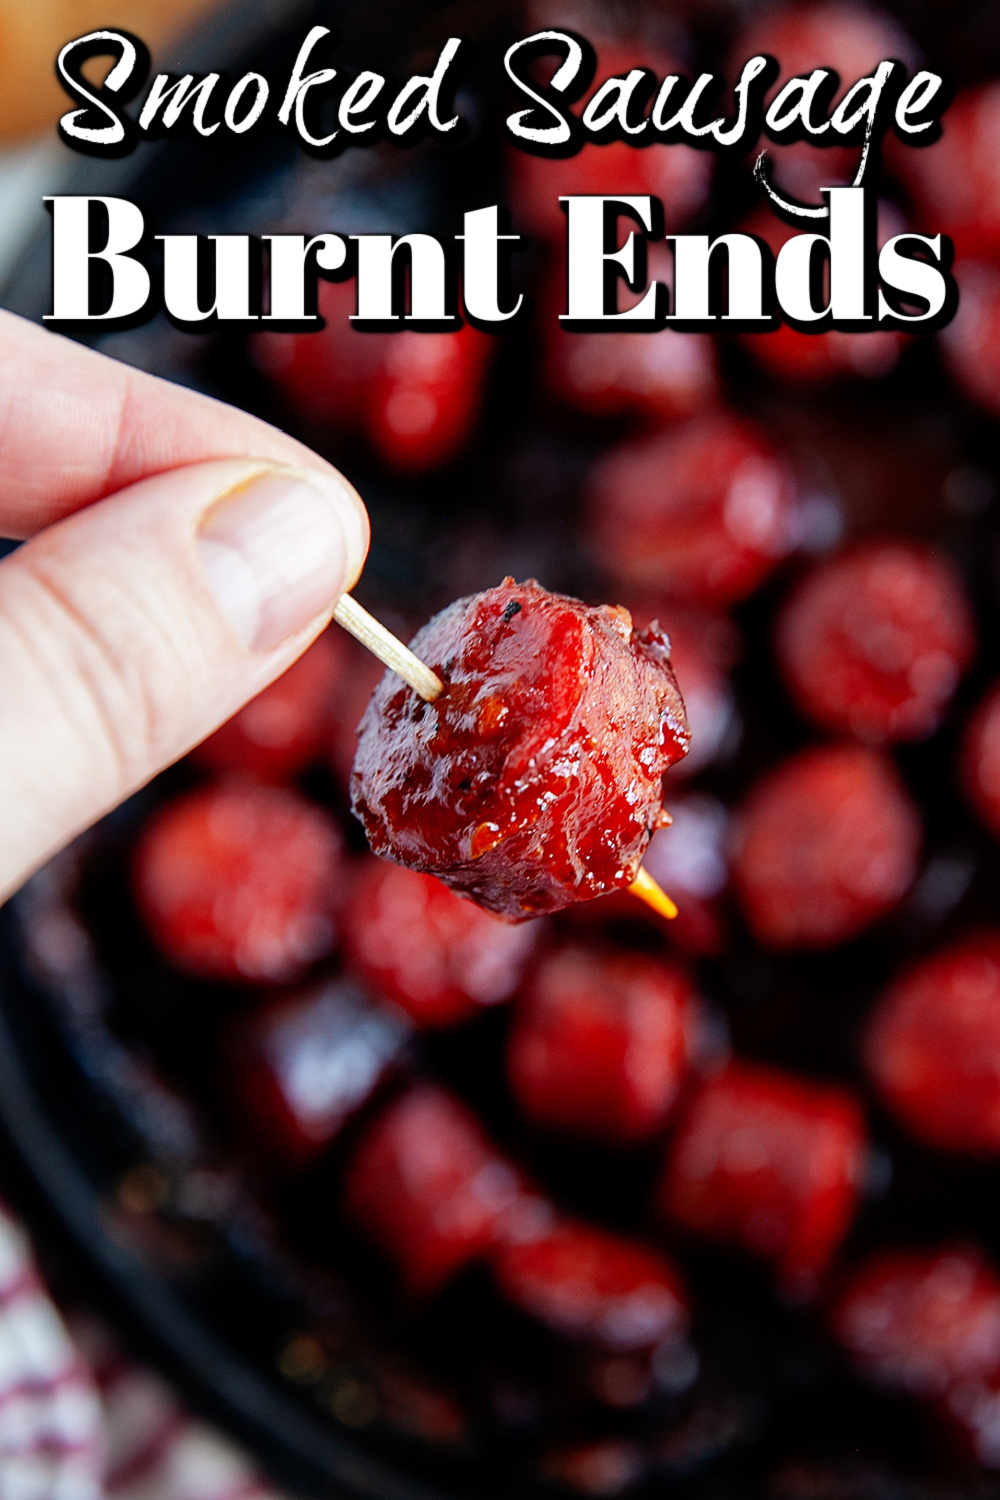 These smoked sausage burnt ends are as superlatively tasty as they are easy! Better make a double batch; they are going to disappear quickly!